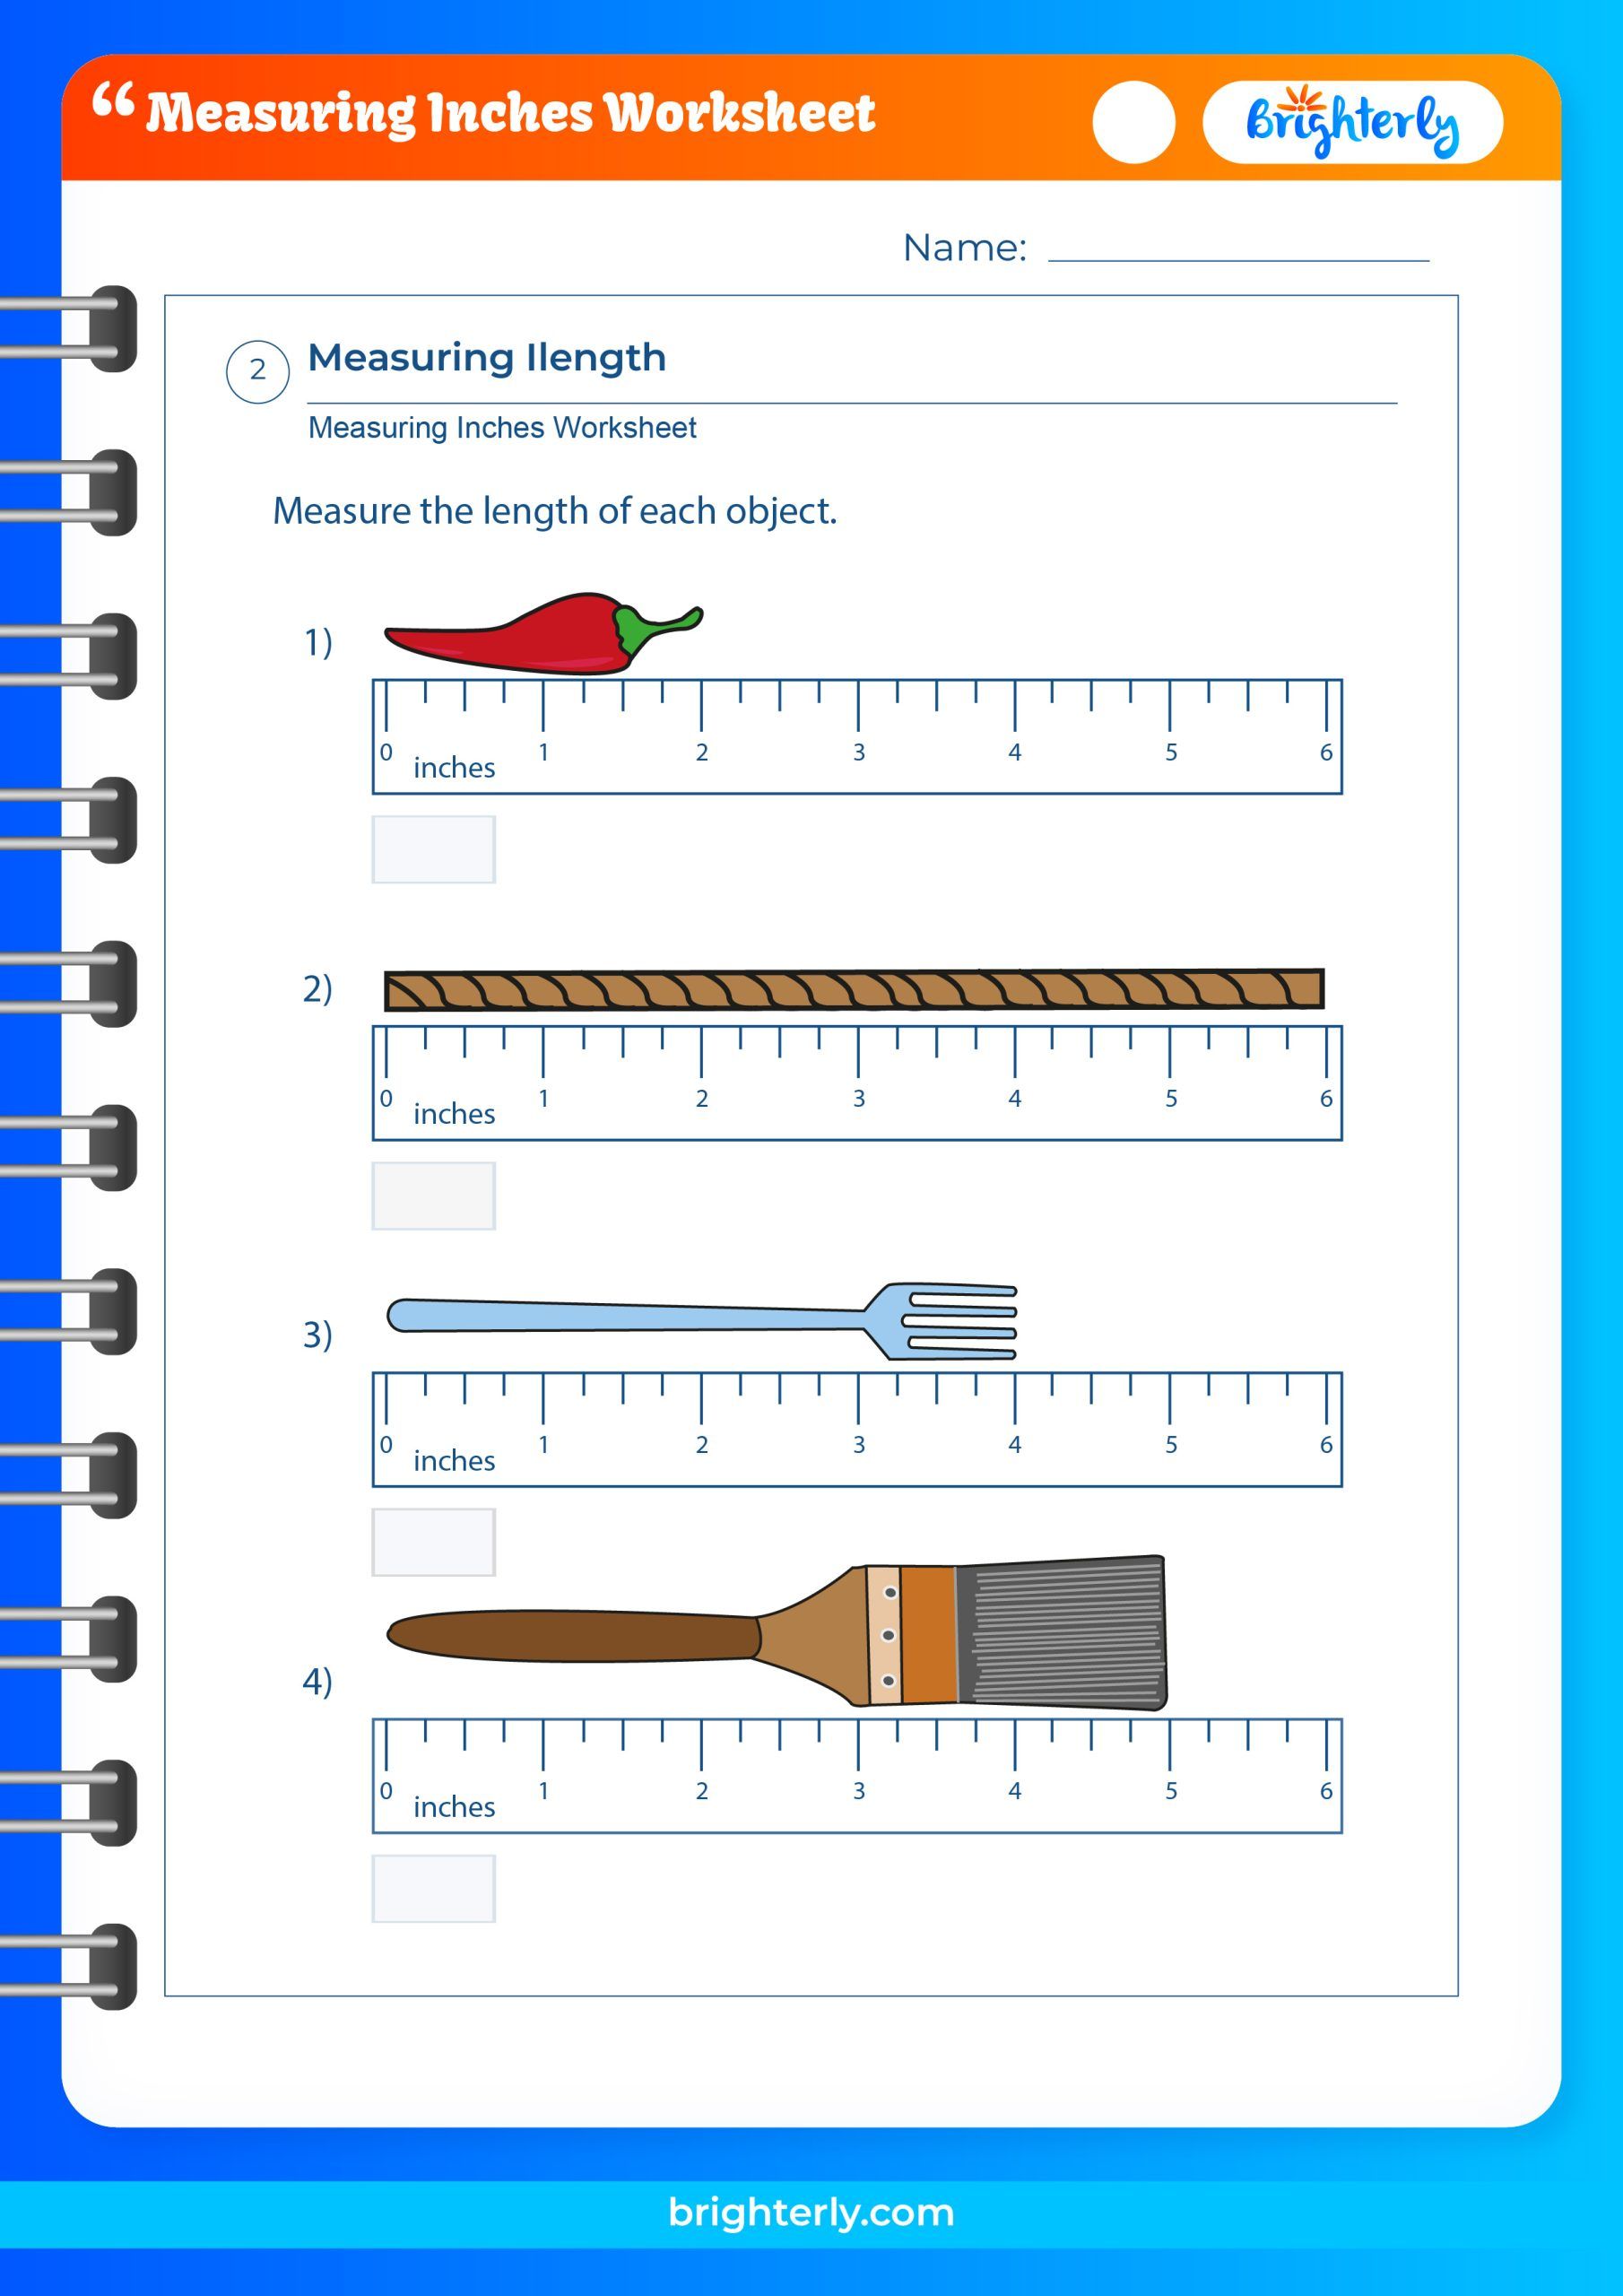 free-printable-measuring-inches-worksheets-for-kids-pdfs